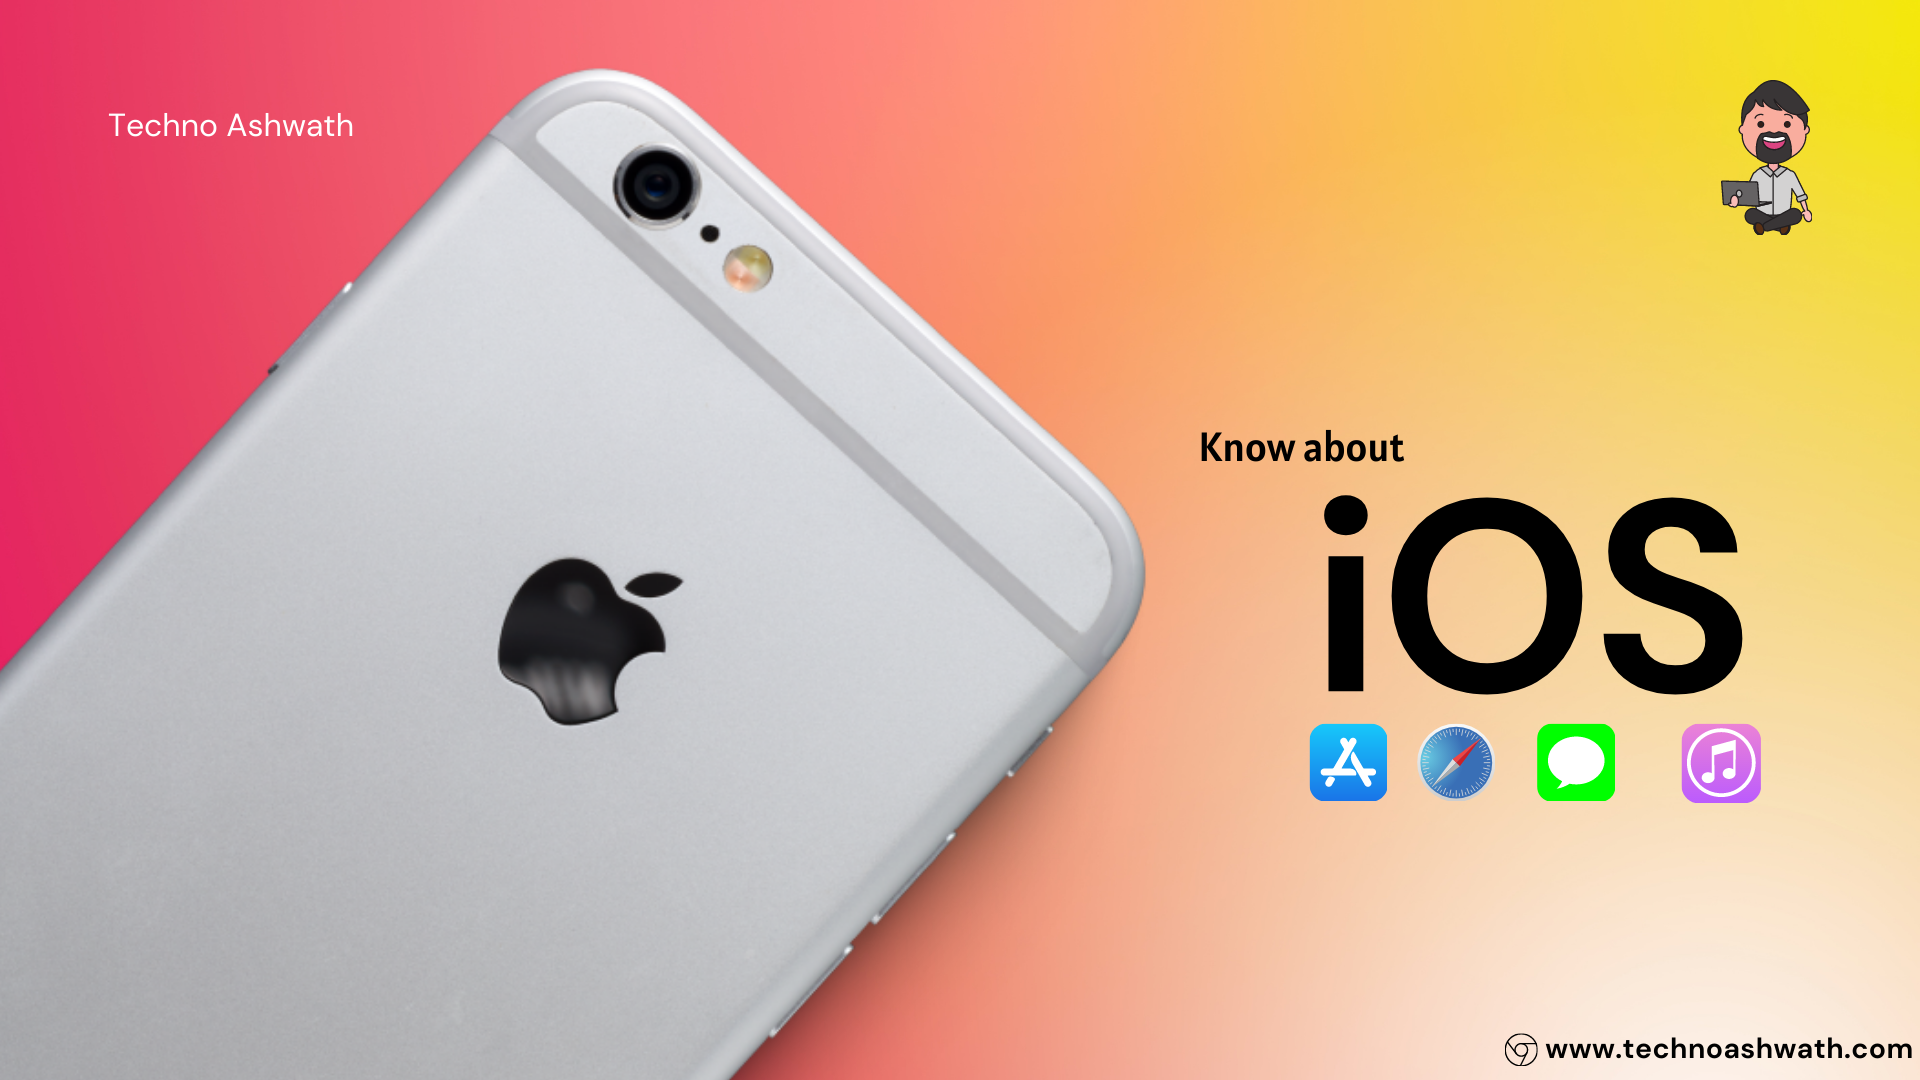 What is iOS? Know more about iOS - Techno Ashwath